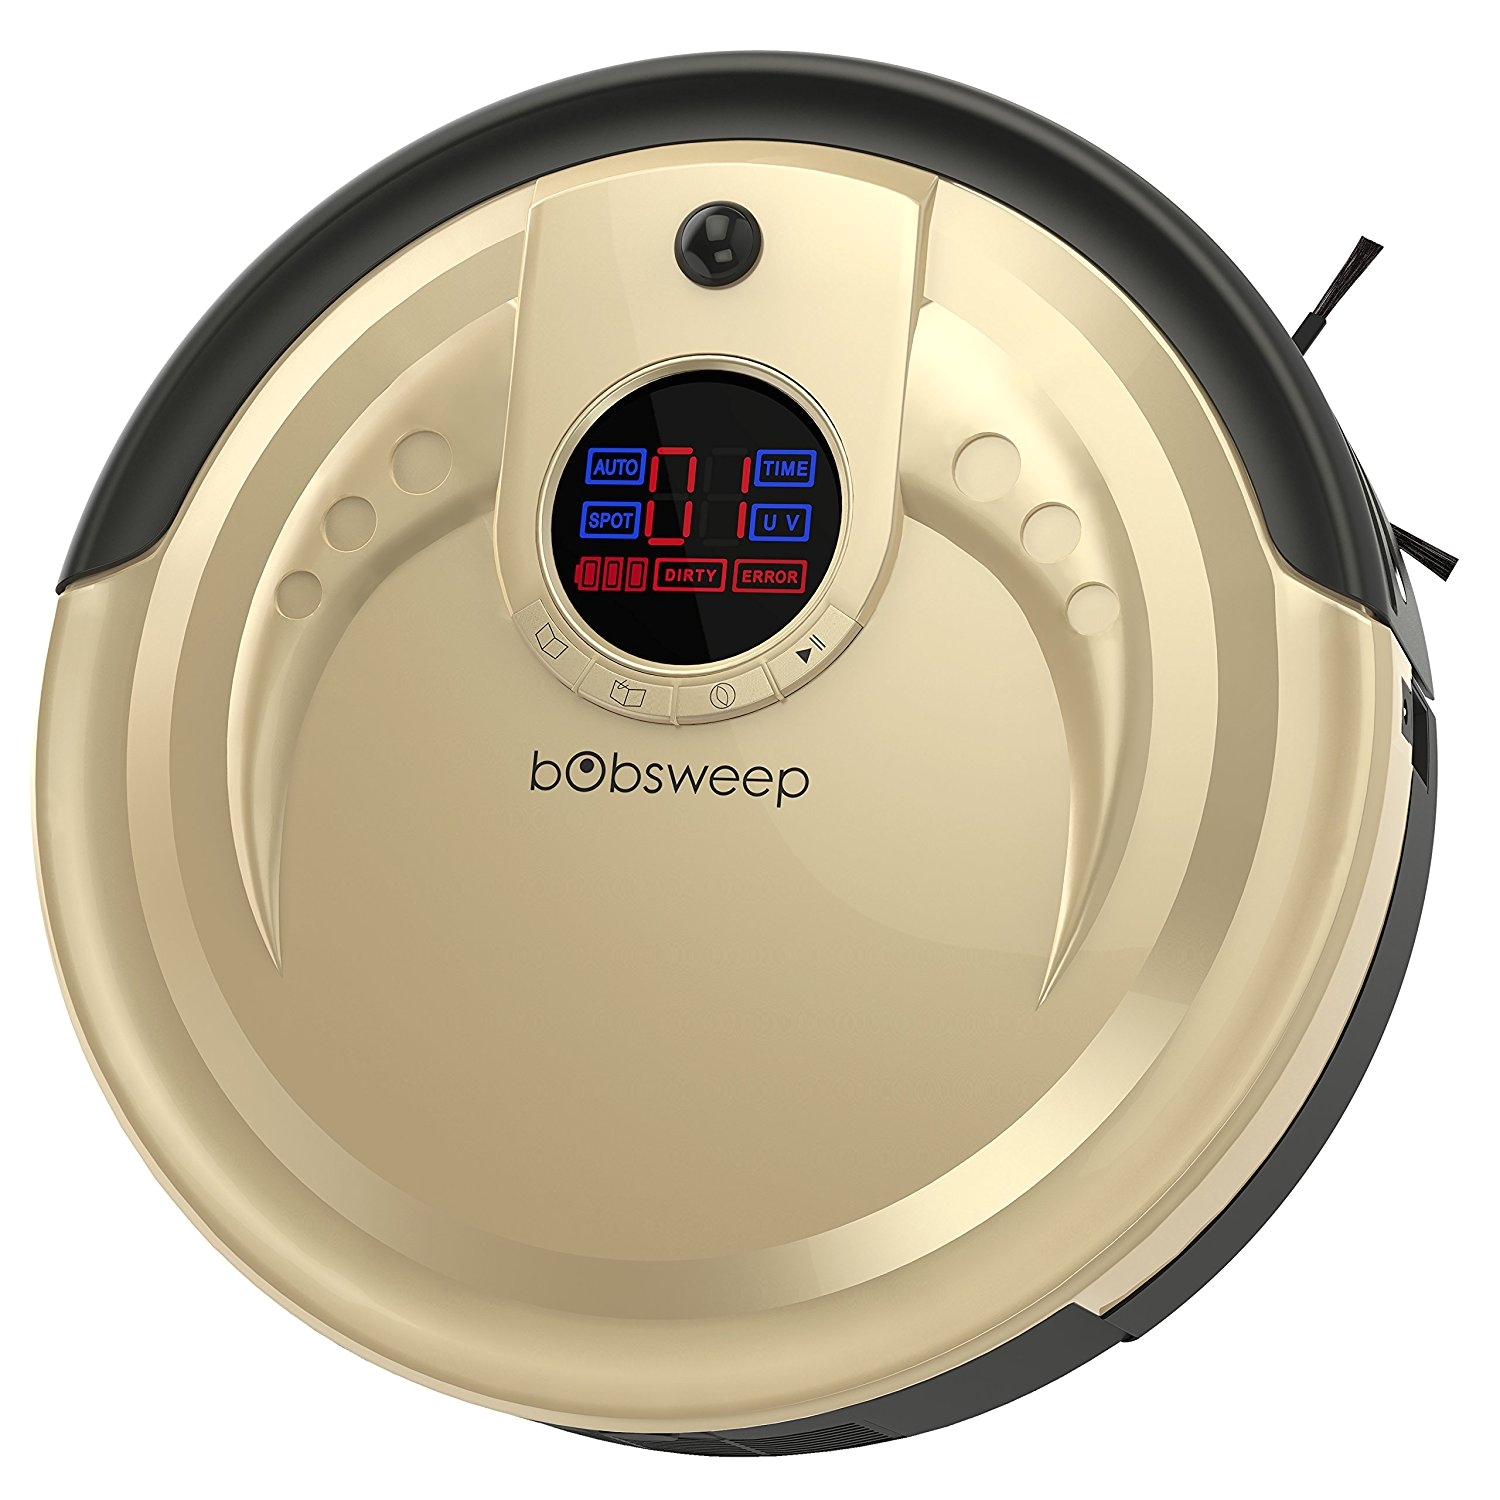 amazon com bobsweep standard robotic vacuum cleaner and mop champagne home kitchen